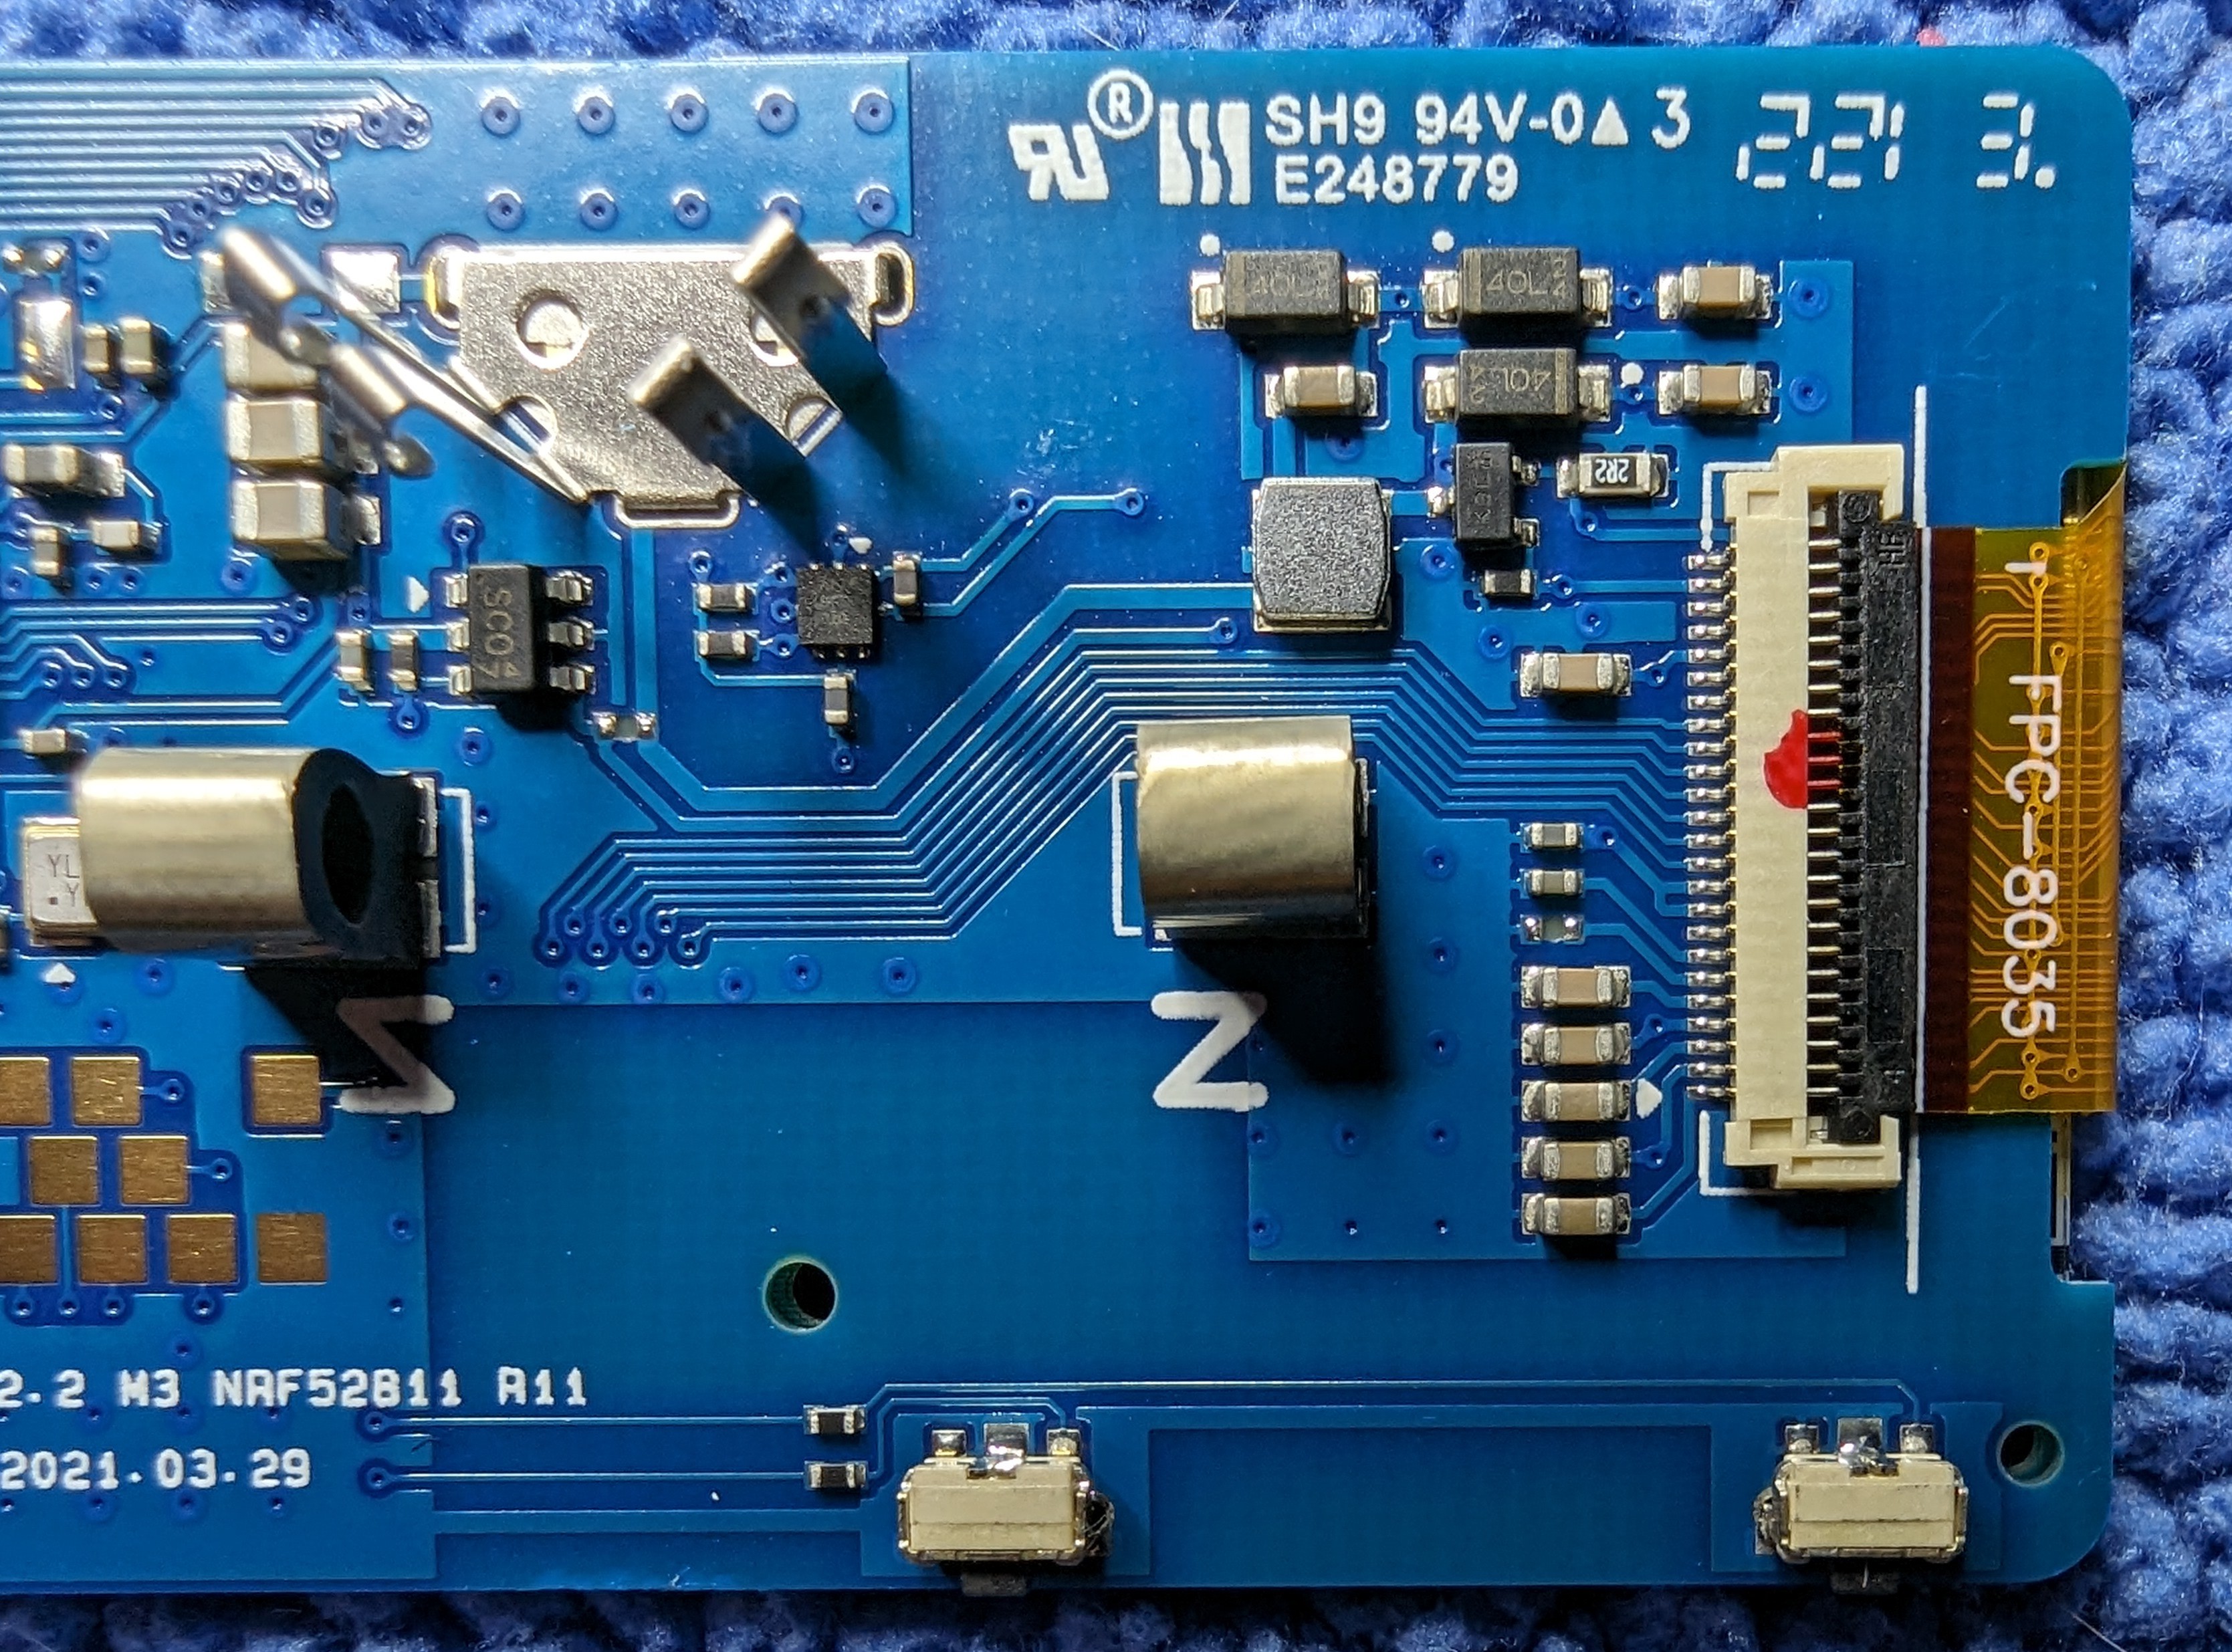 Close up look at the second half of the PCB.